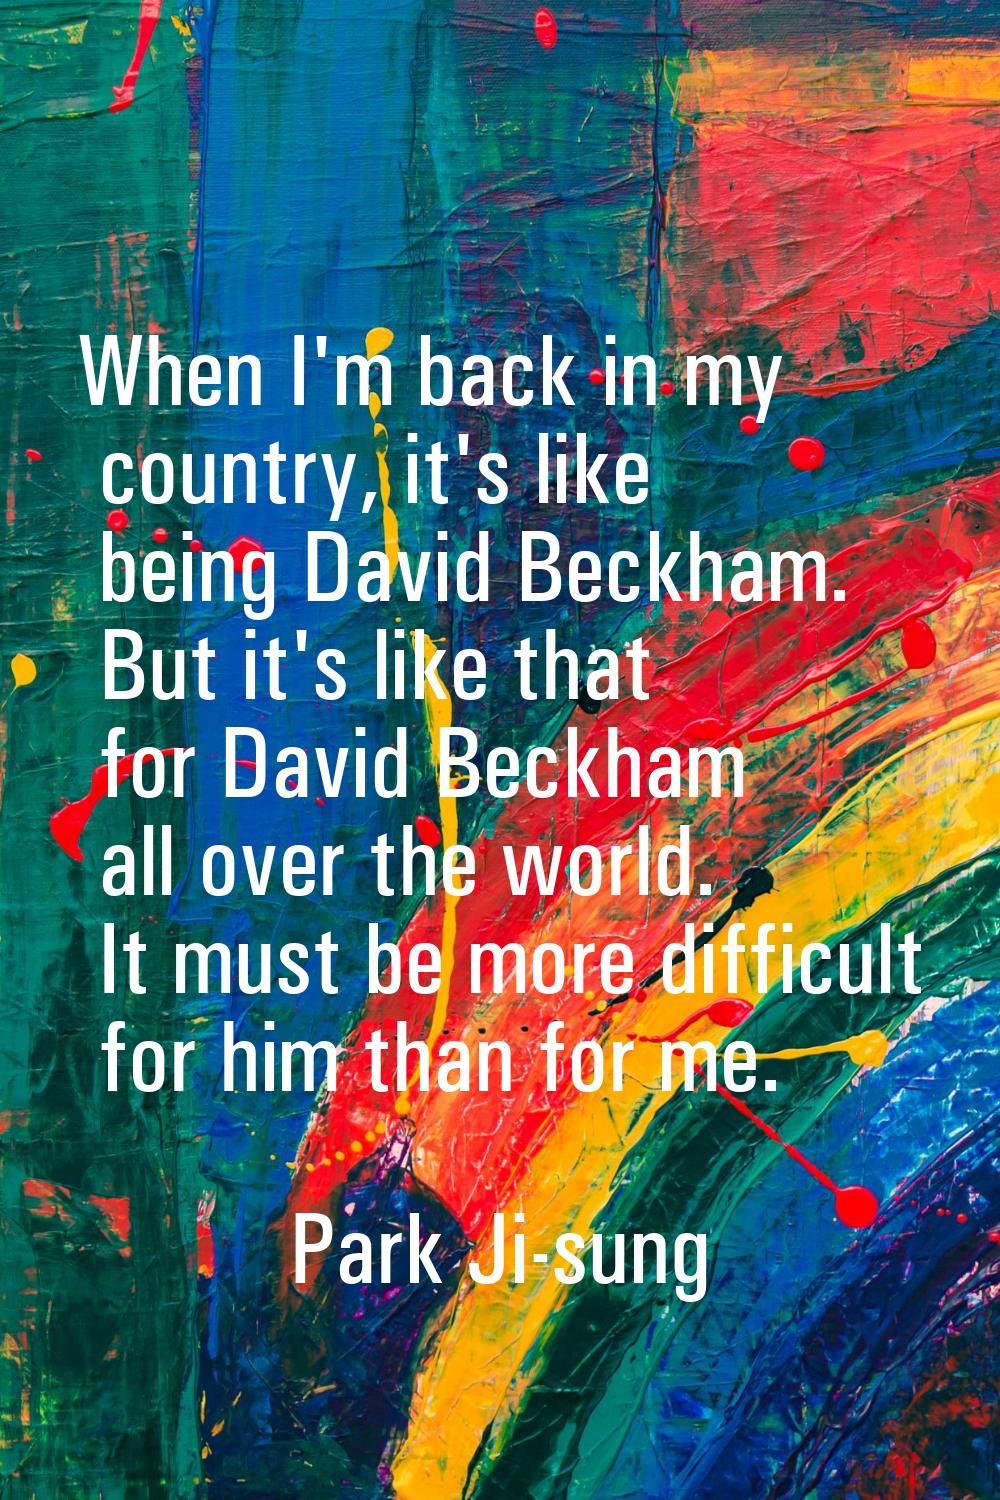 When I'm back in my country, it's like being David Beckham. But it's like that for David Beckham al